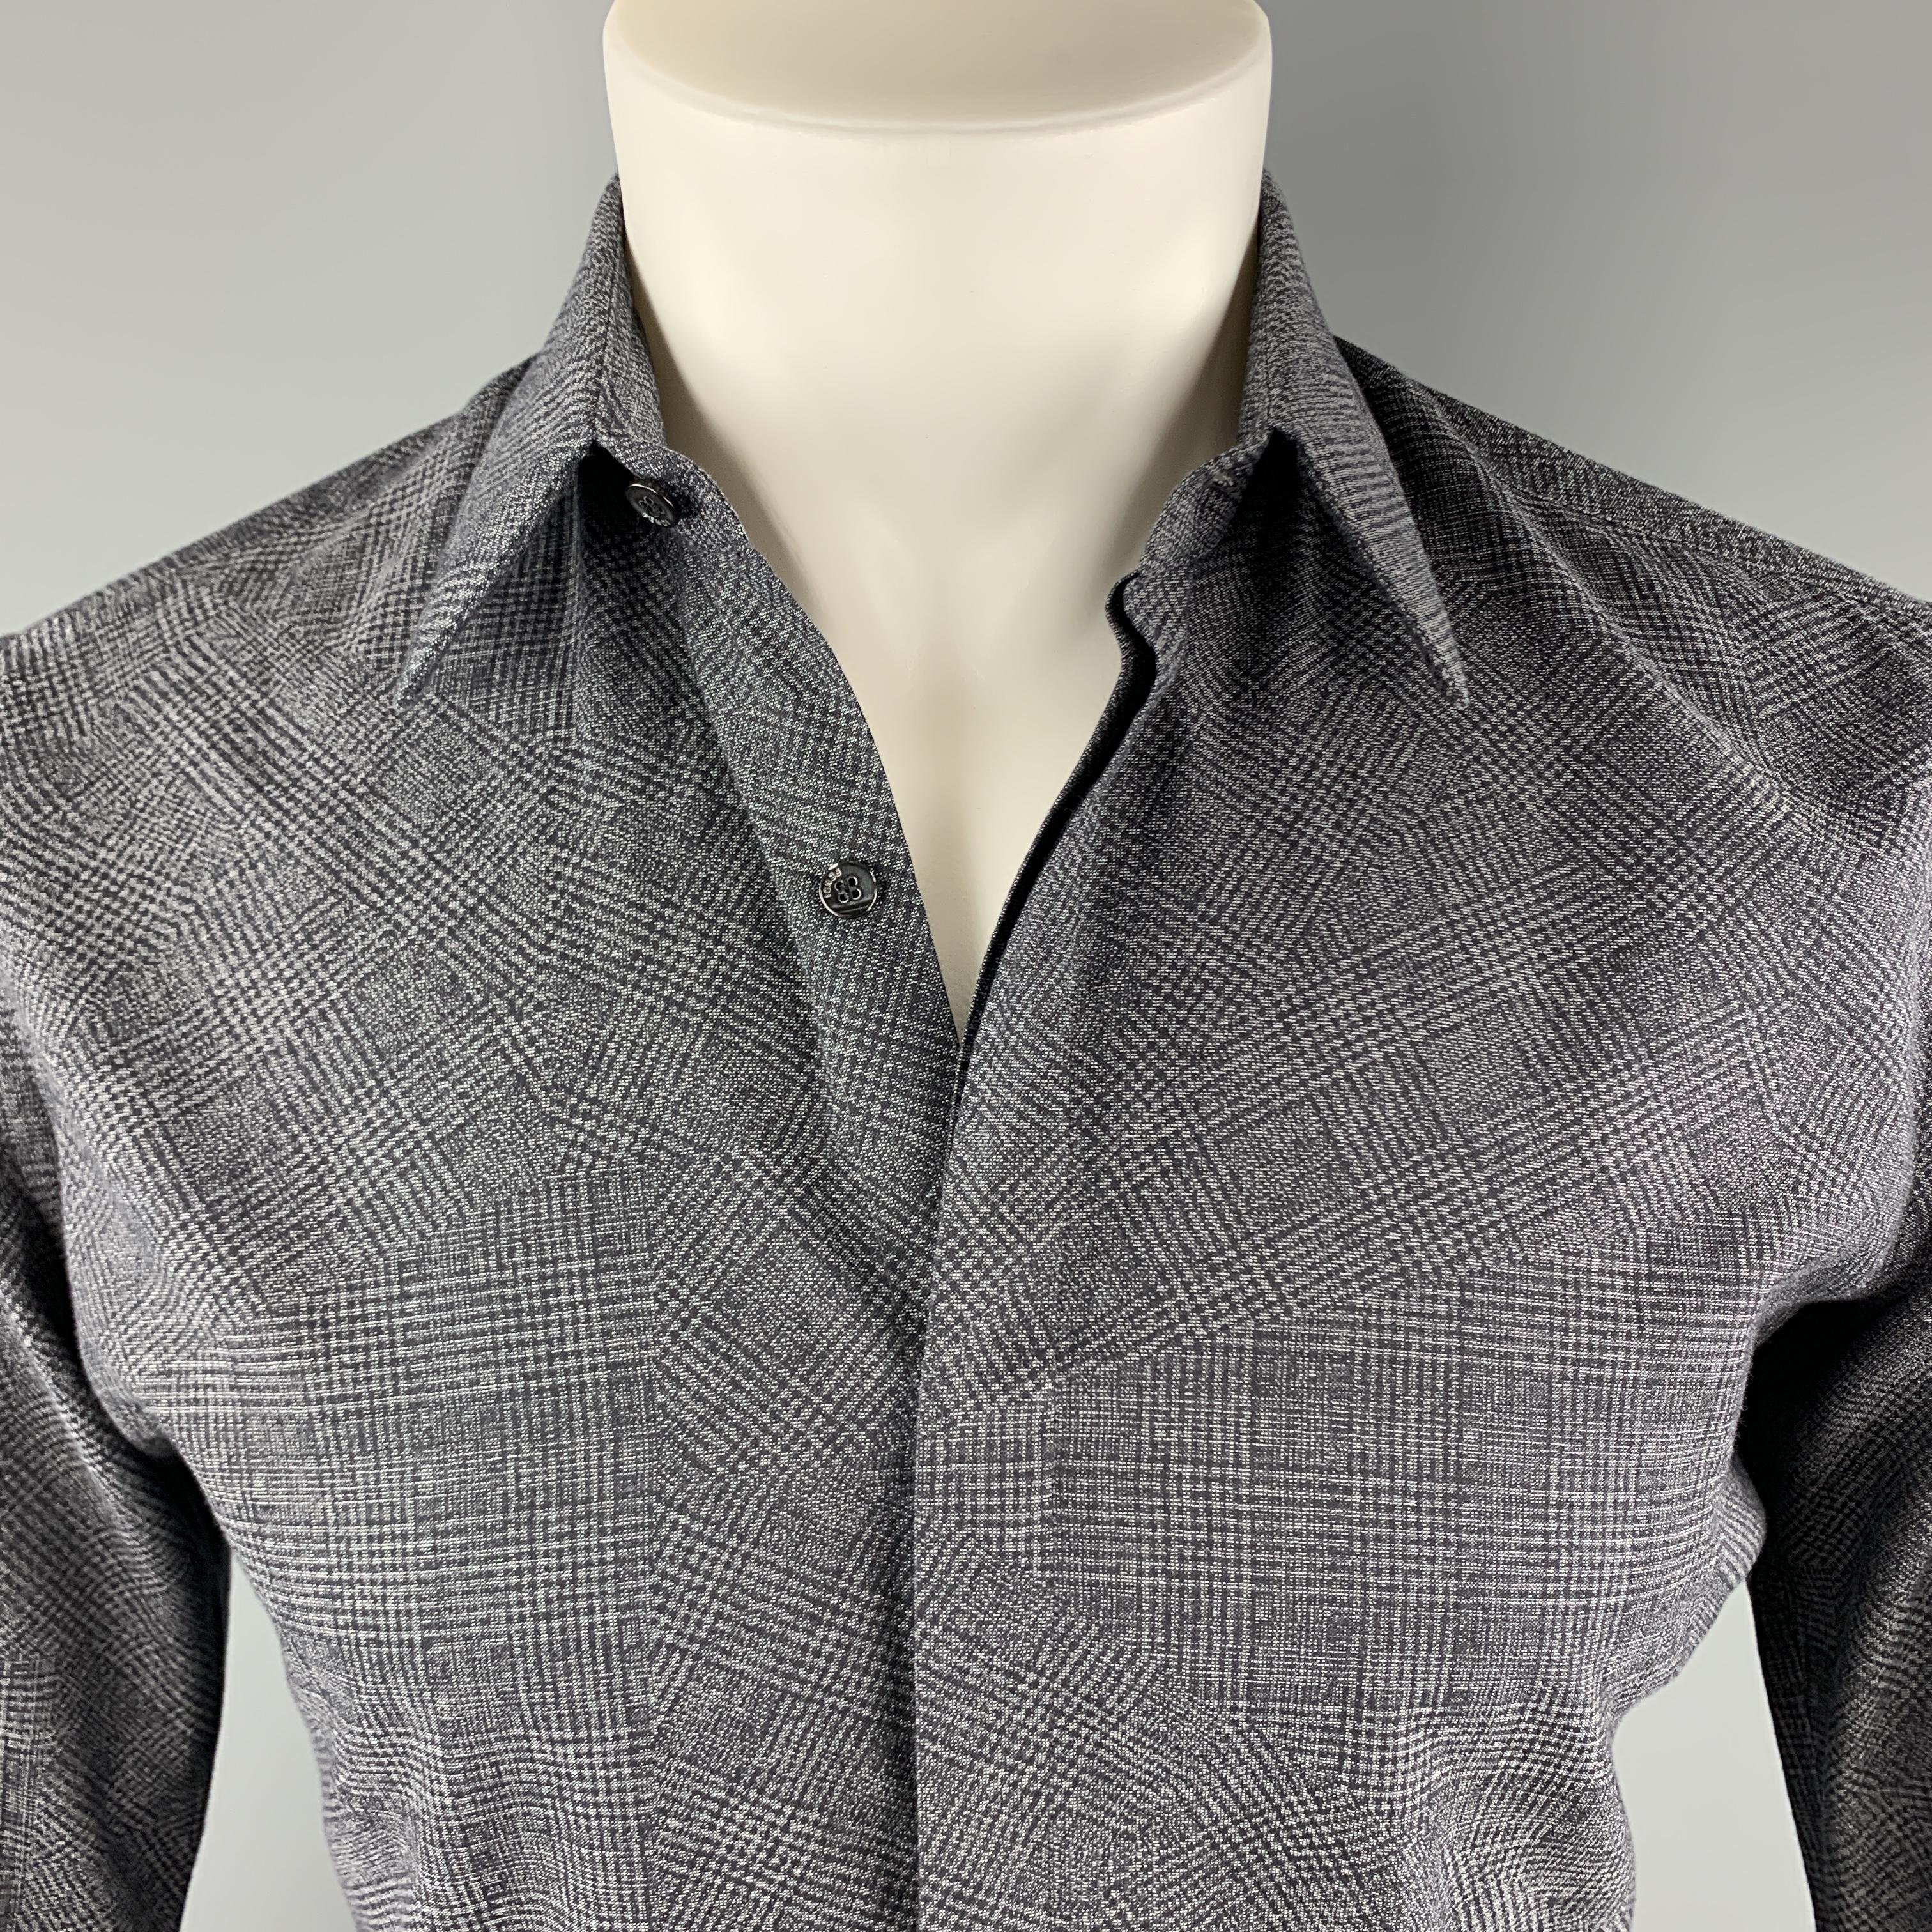 FENDI shirt comes in black and gray abstract plaid cotton with a hidden placket button front. Made in Italy.

Excellent Pre-Owned Condition.
Marked: 38

Measurements:

Shoulder: 16 in.
Chest: 41 in.
Sleeve: 22 in.
Length: 30 in.